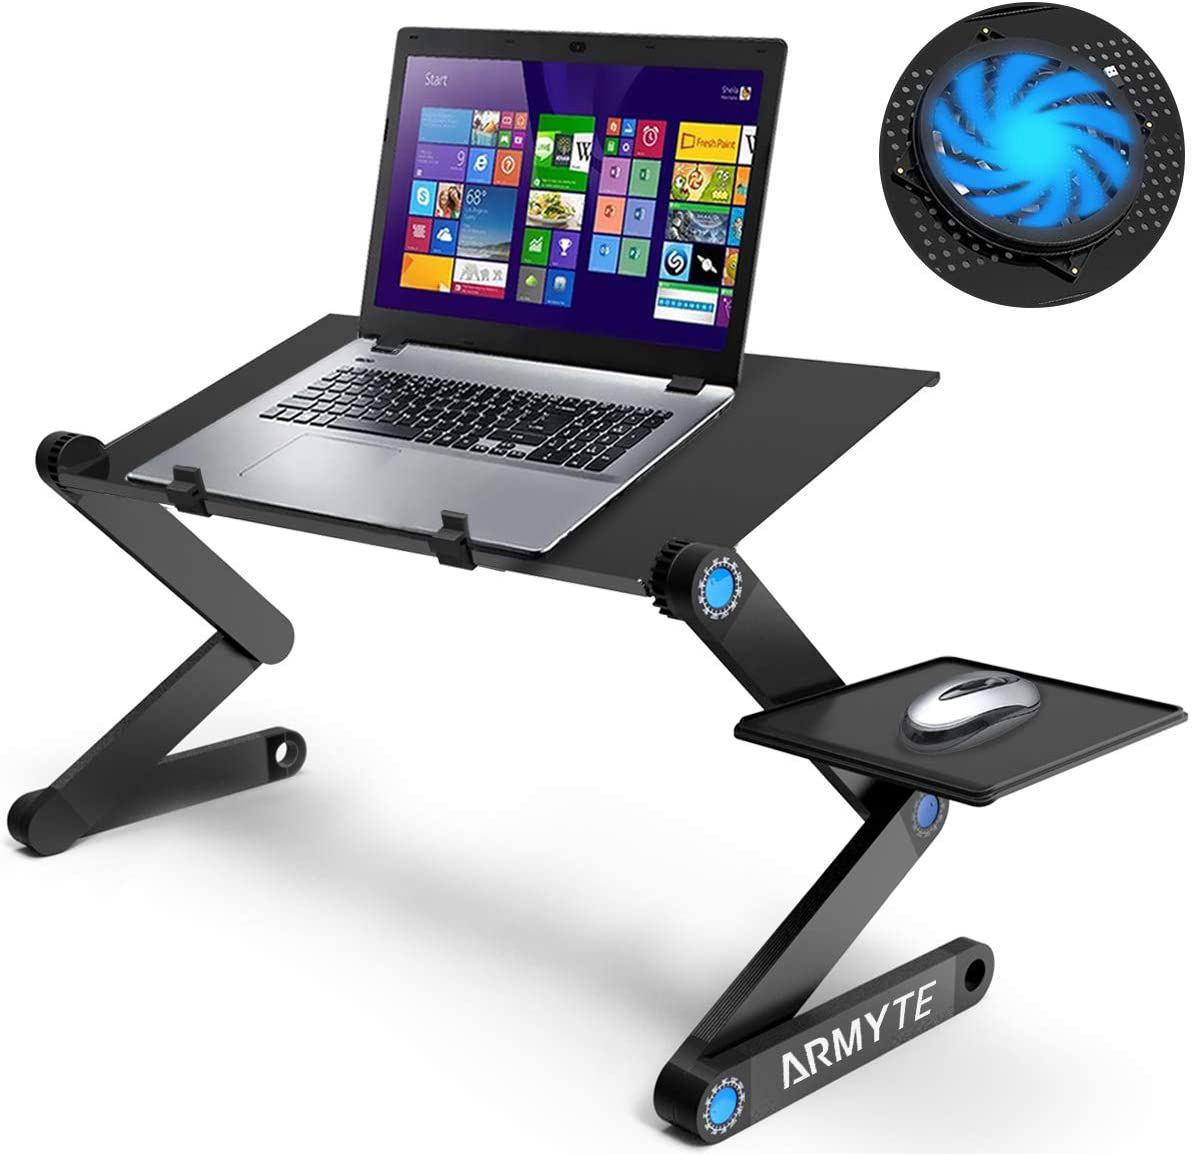 Extra Wide Adjustable Laptop Stand With Cooling Fan & Mouse Pad For 17 Throughout Green Adjustable Laptop Desks (View 9 of 15)